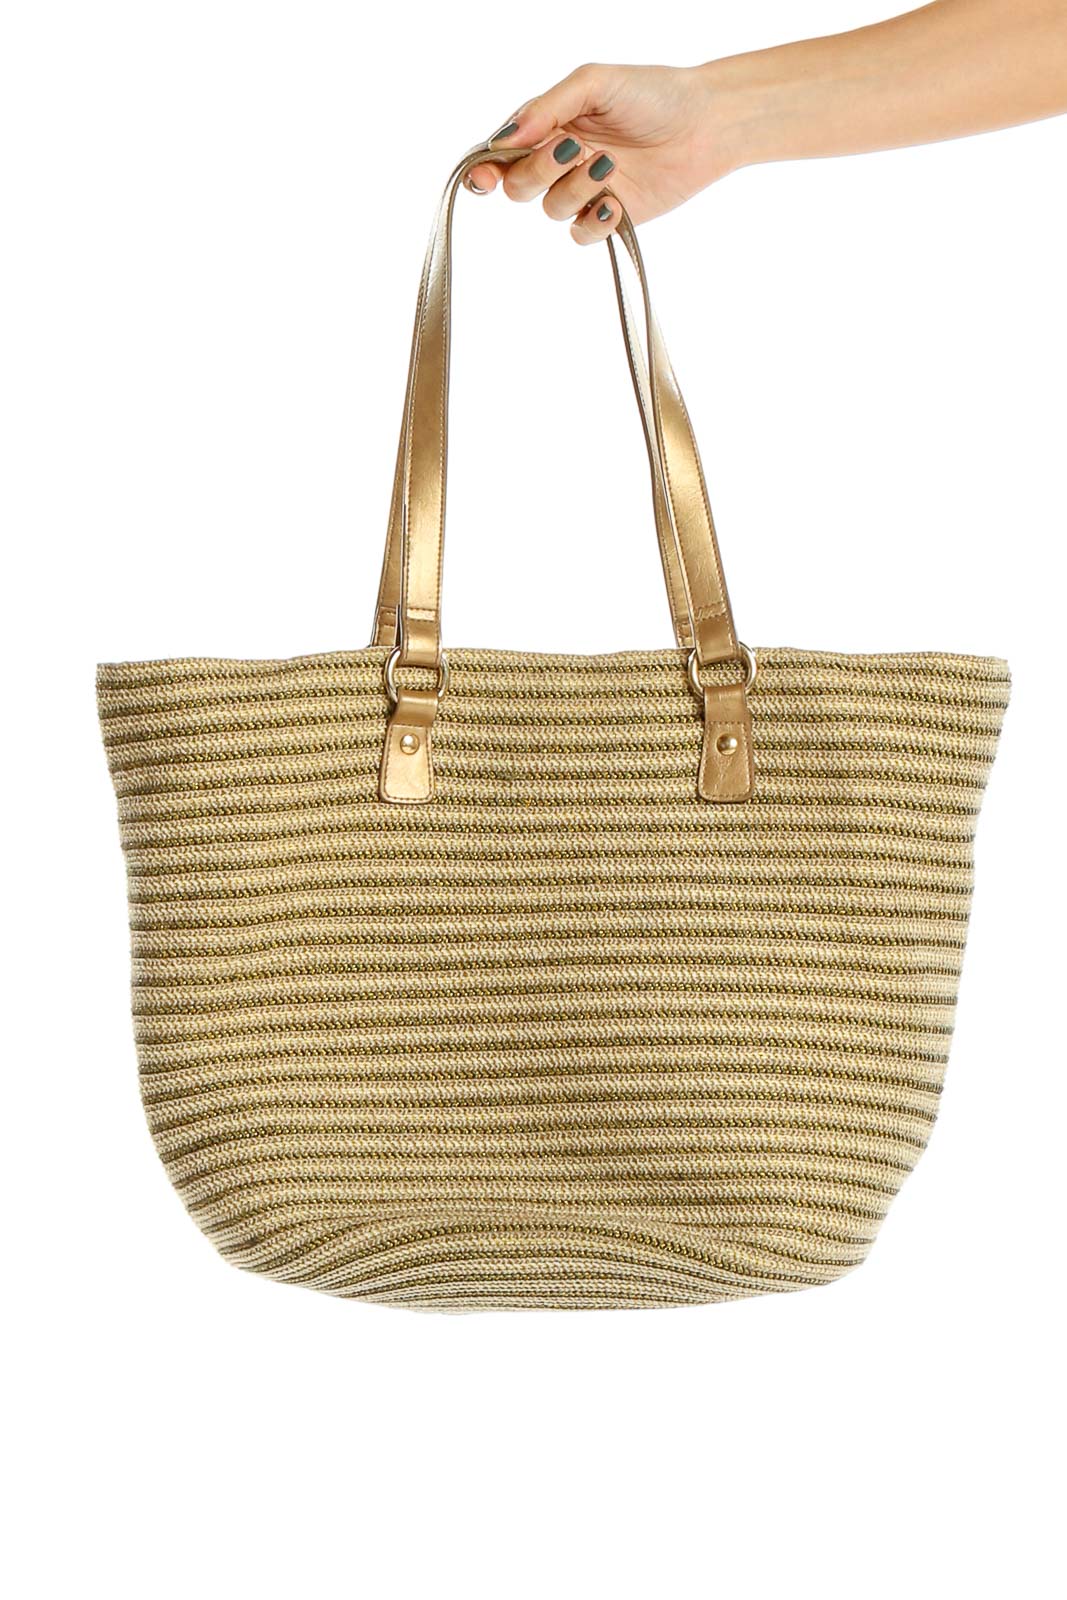 Brown Wicker Tote Bag Front